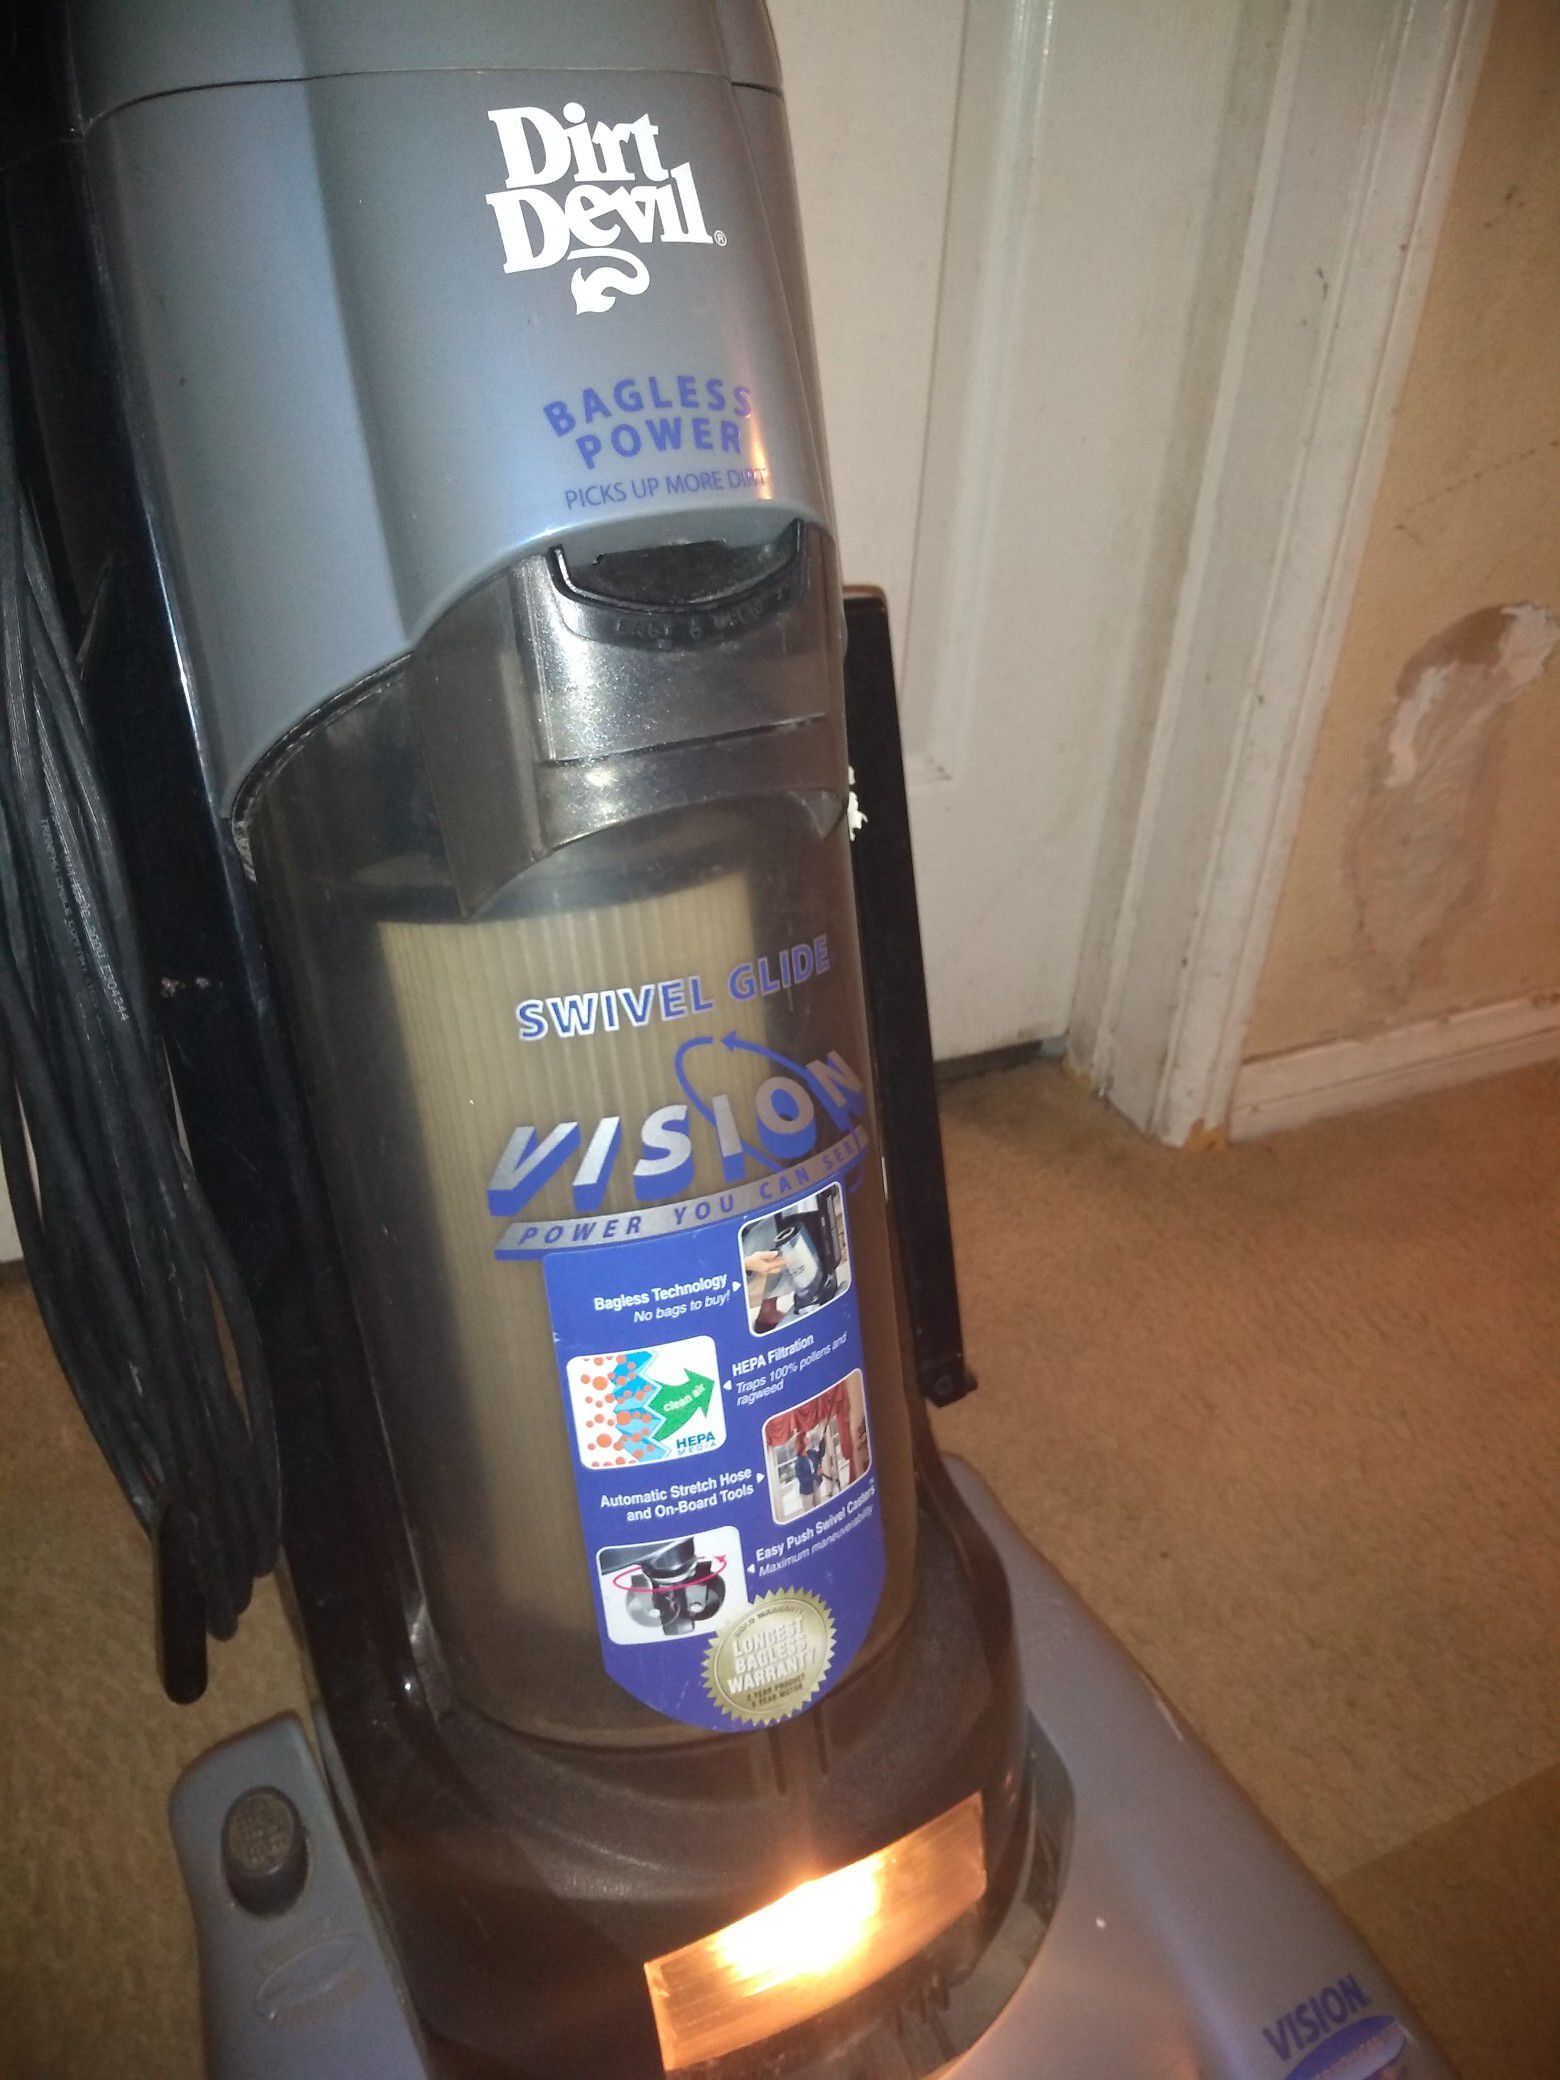 Vacuum cleaner Black+Decker Lightweight Compact for Sale in Culver City, CA  - OfferUp